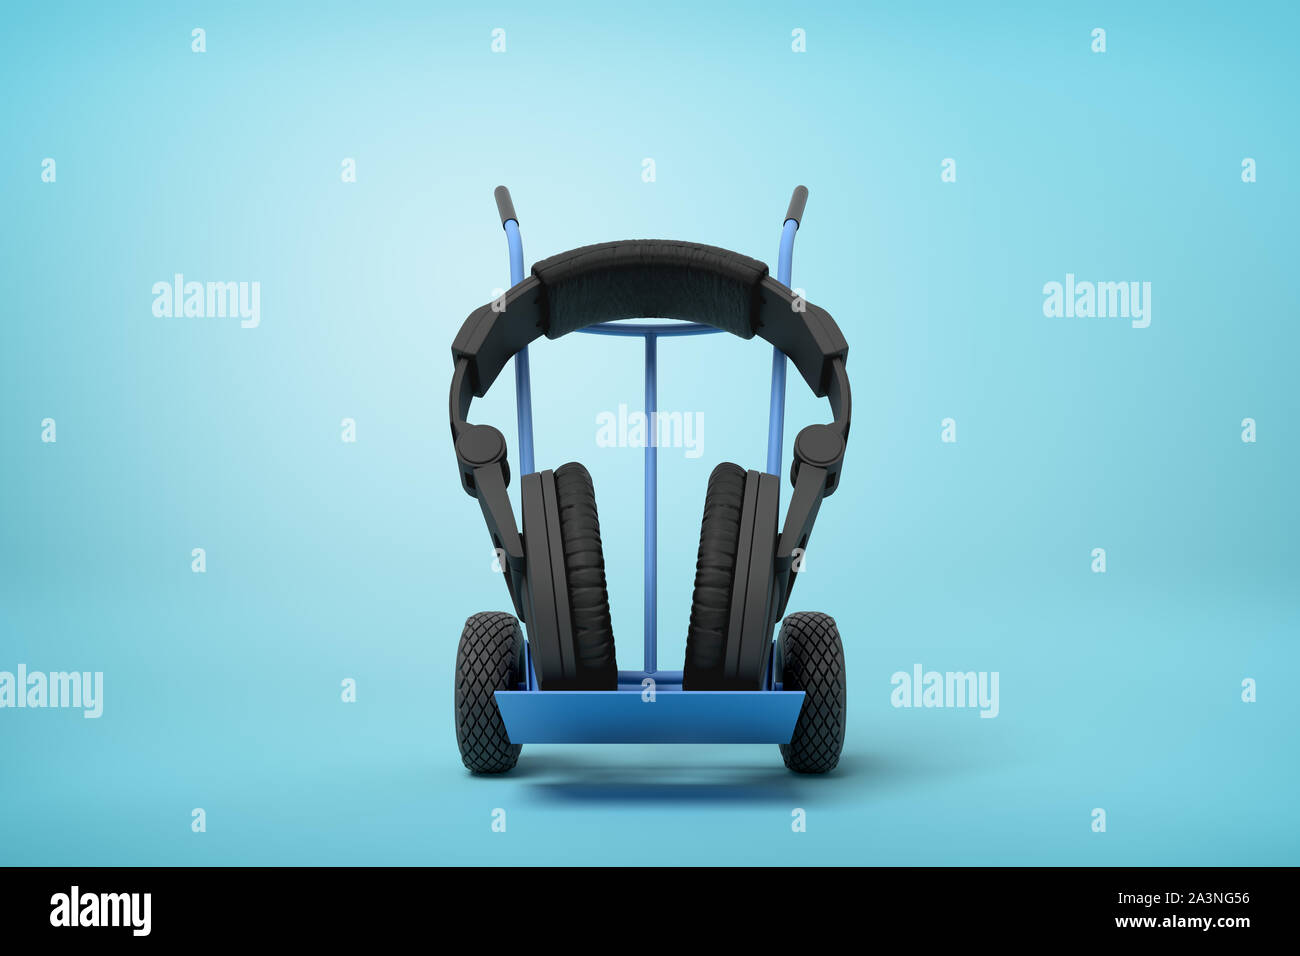 3d rendering of black headphones on a hand truck on blue background Stock Photo